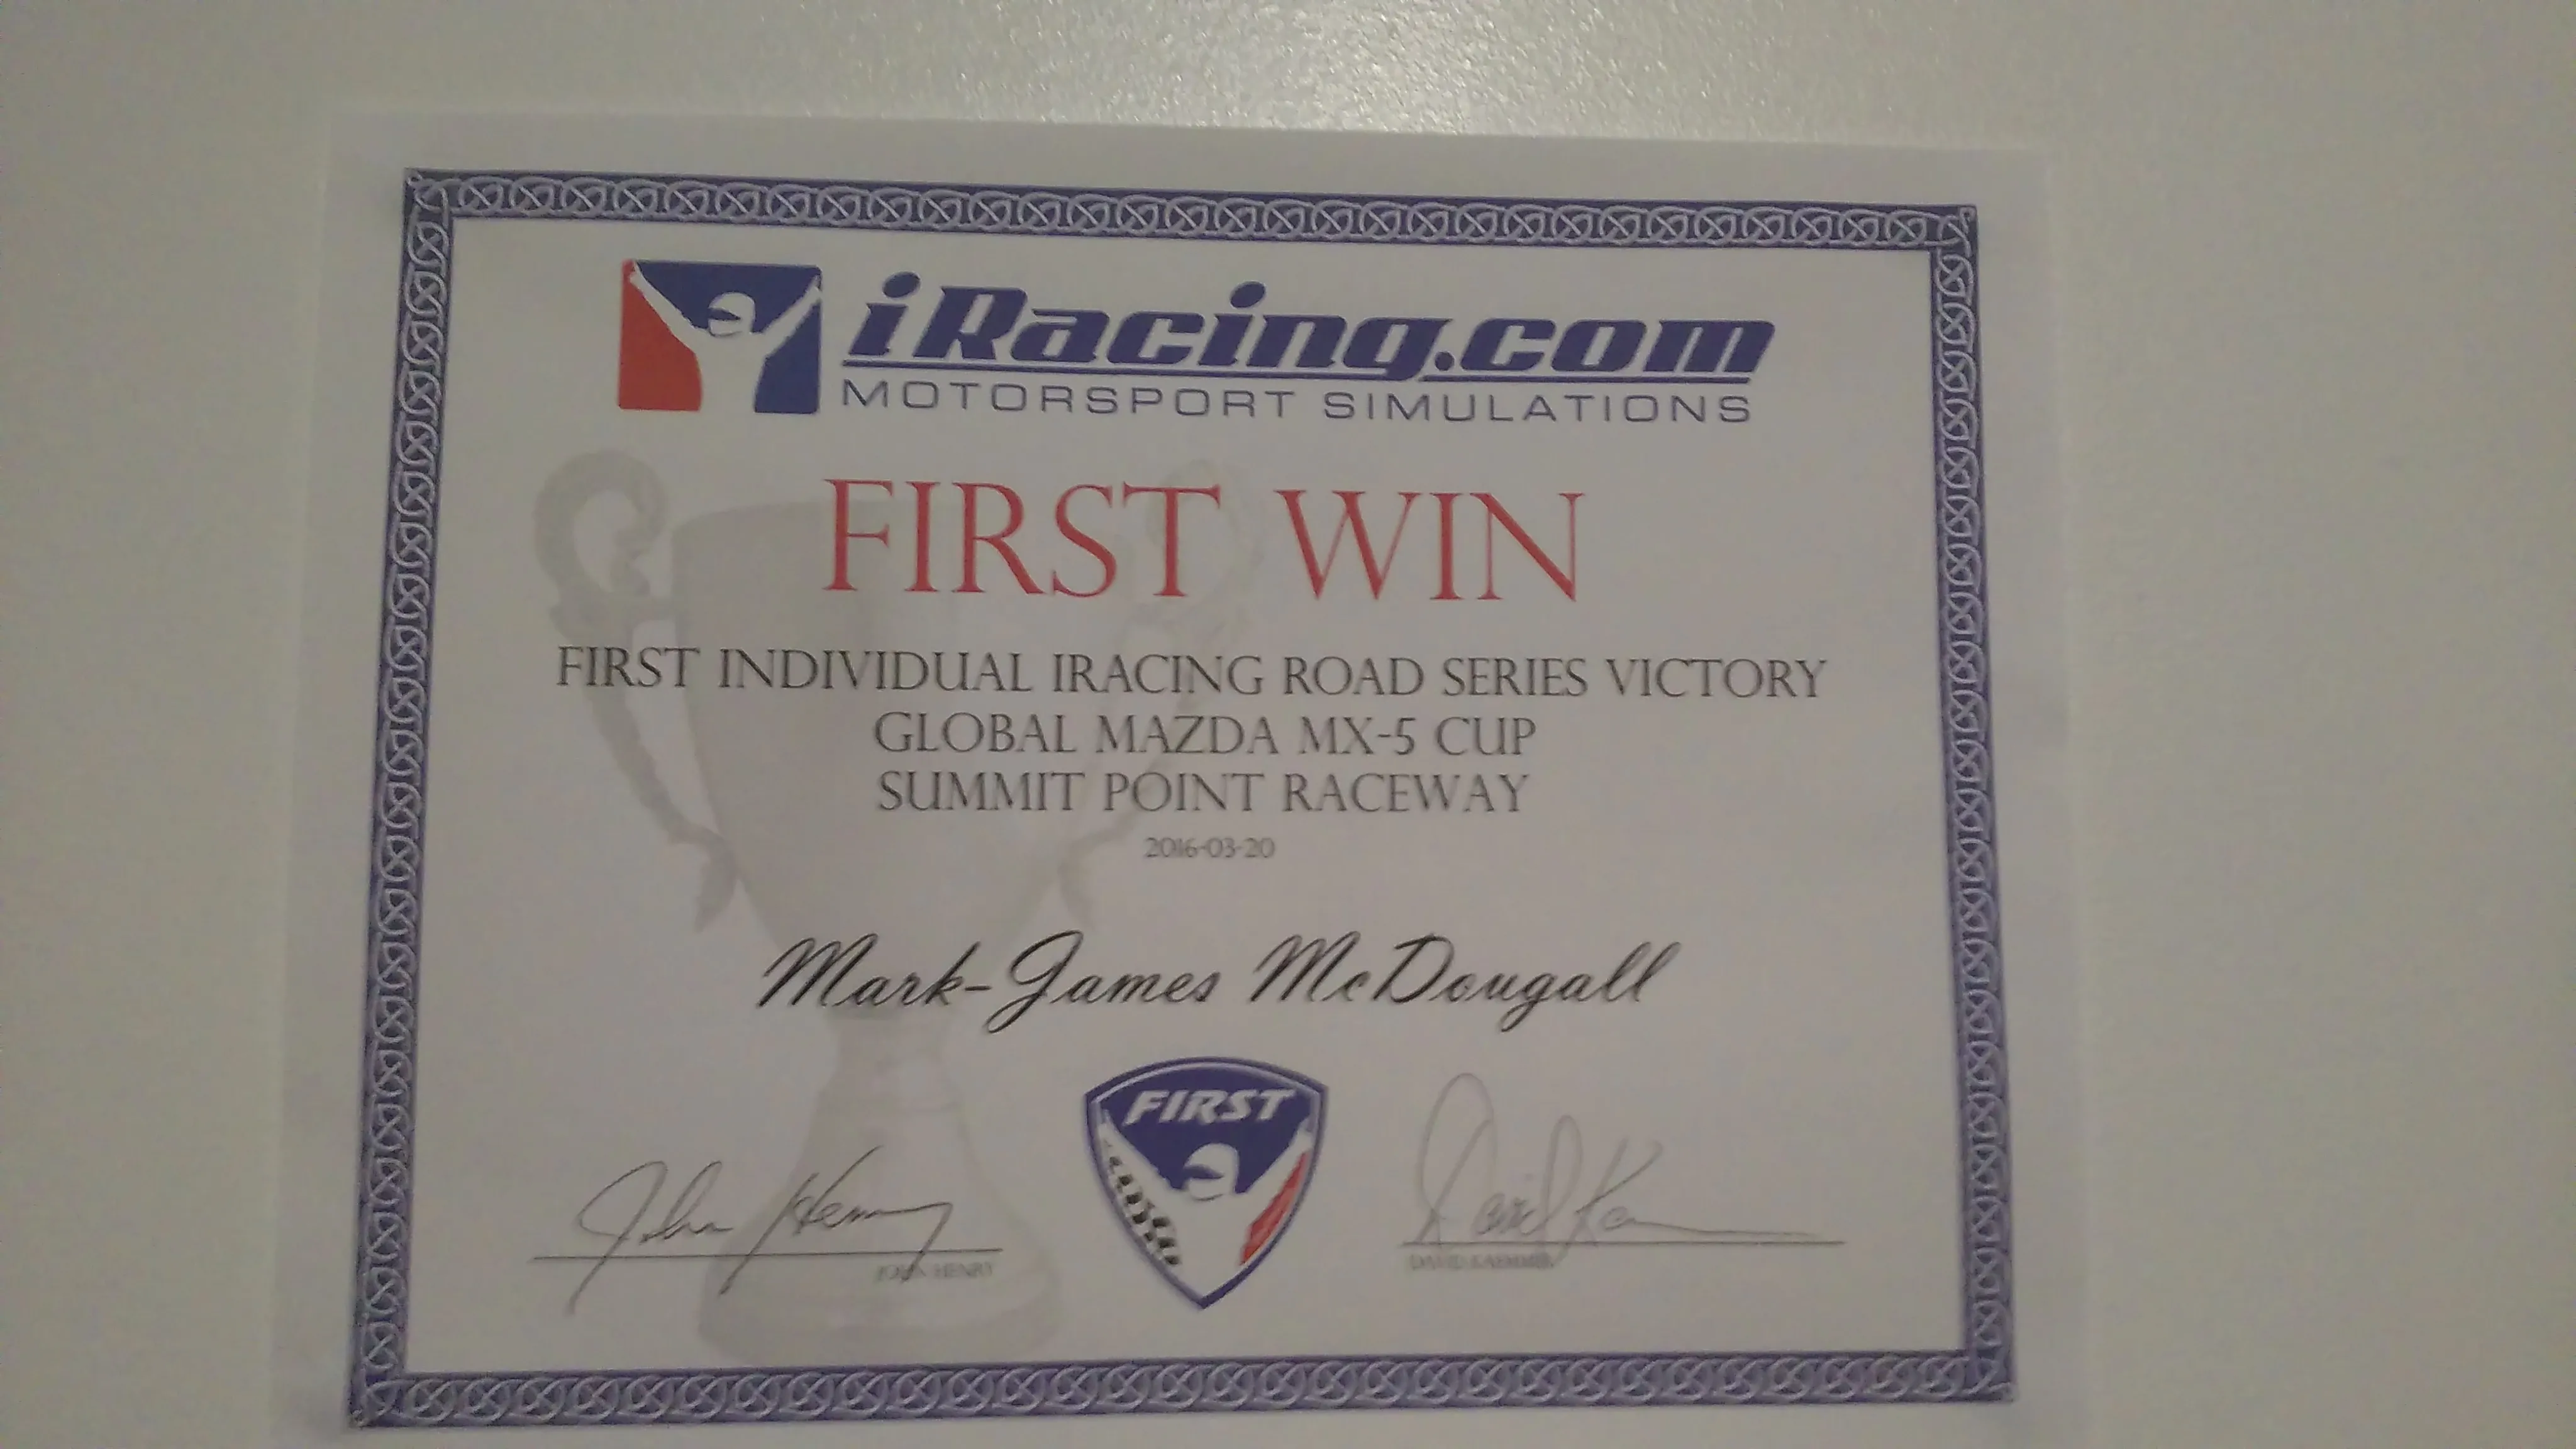 Photo of my iRacing first win certificate